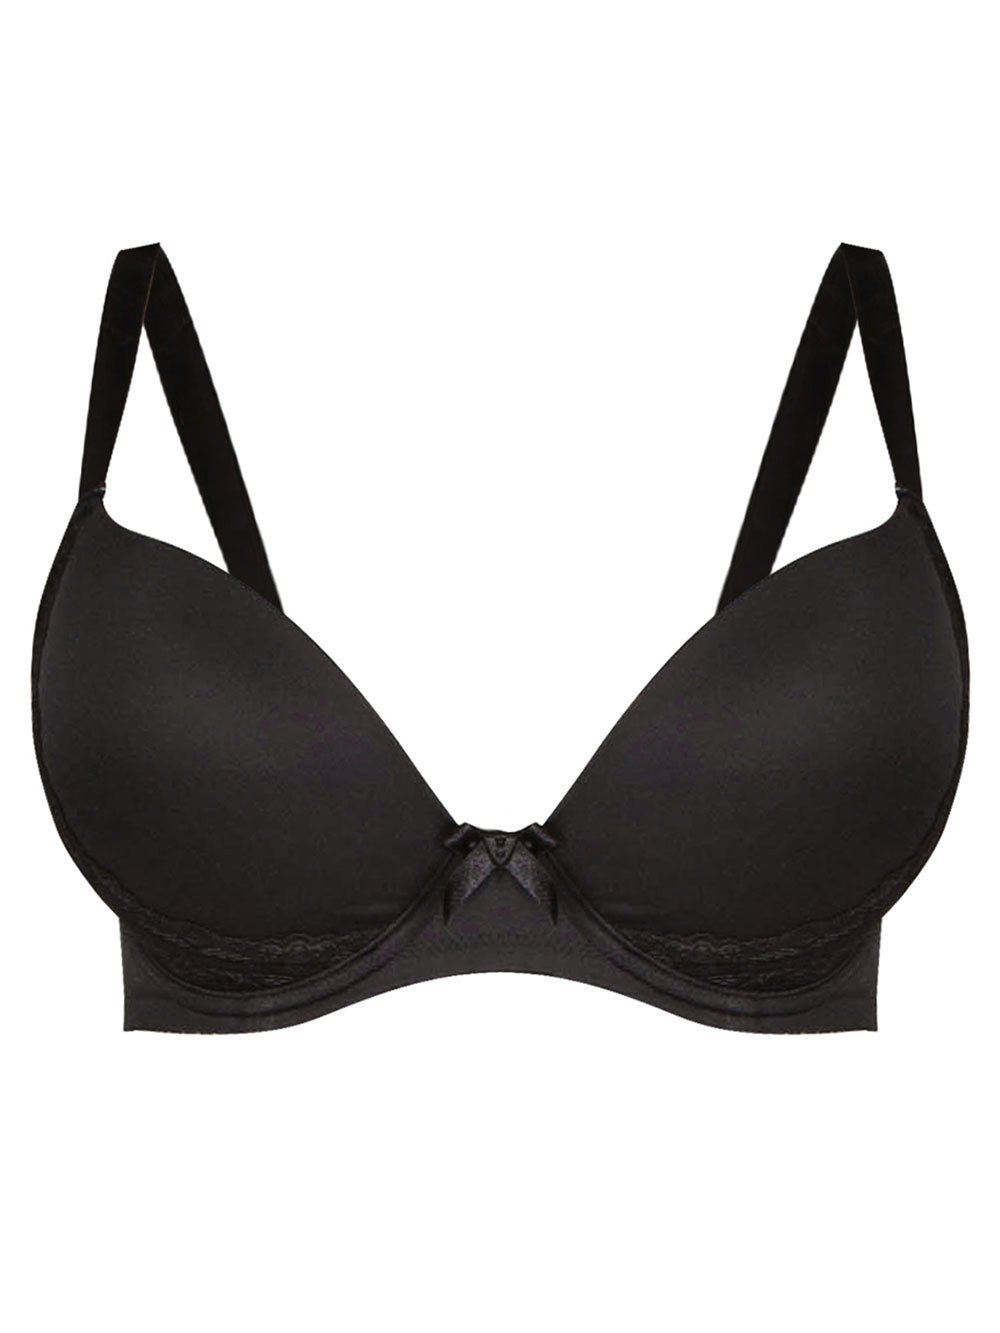 Choosing Between Comfort and Fashion: The Enigma of Push-Up Bras